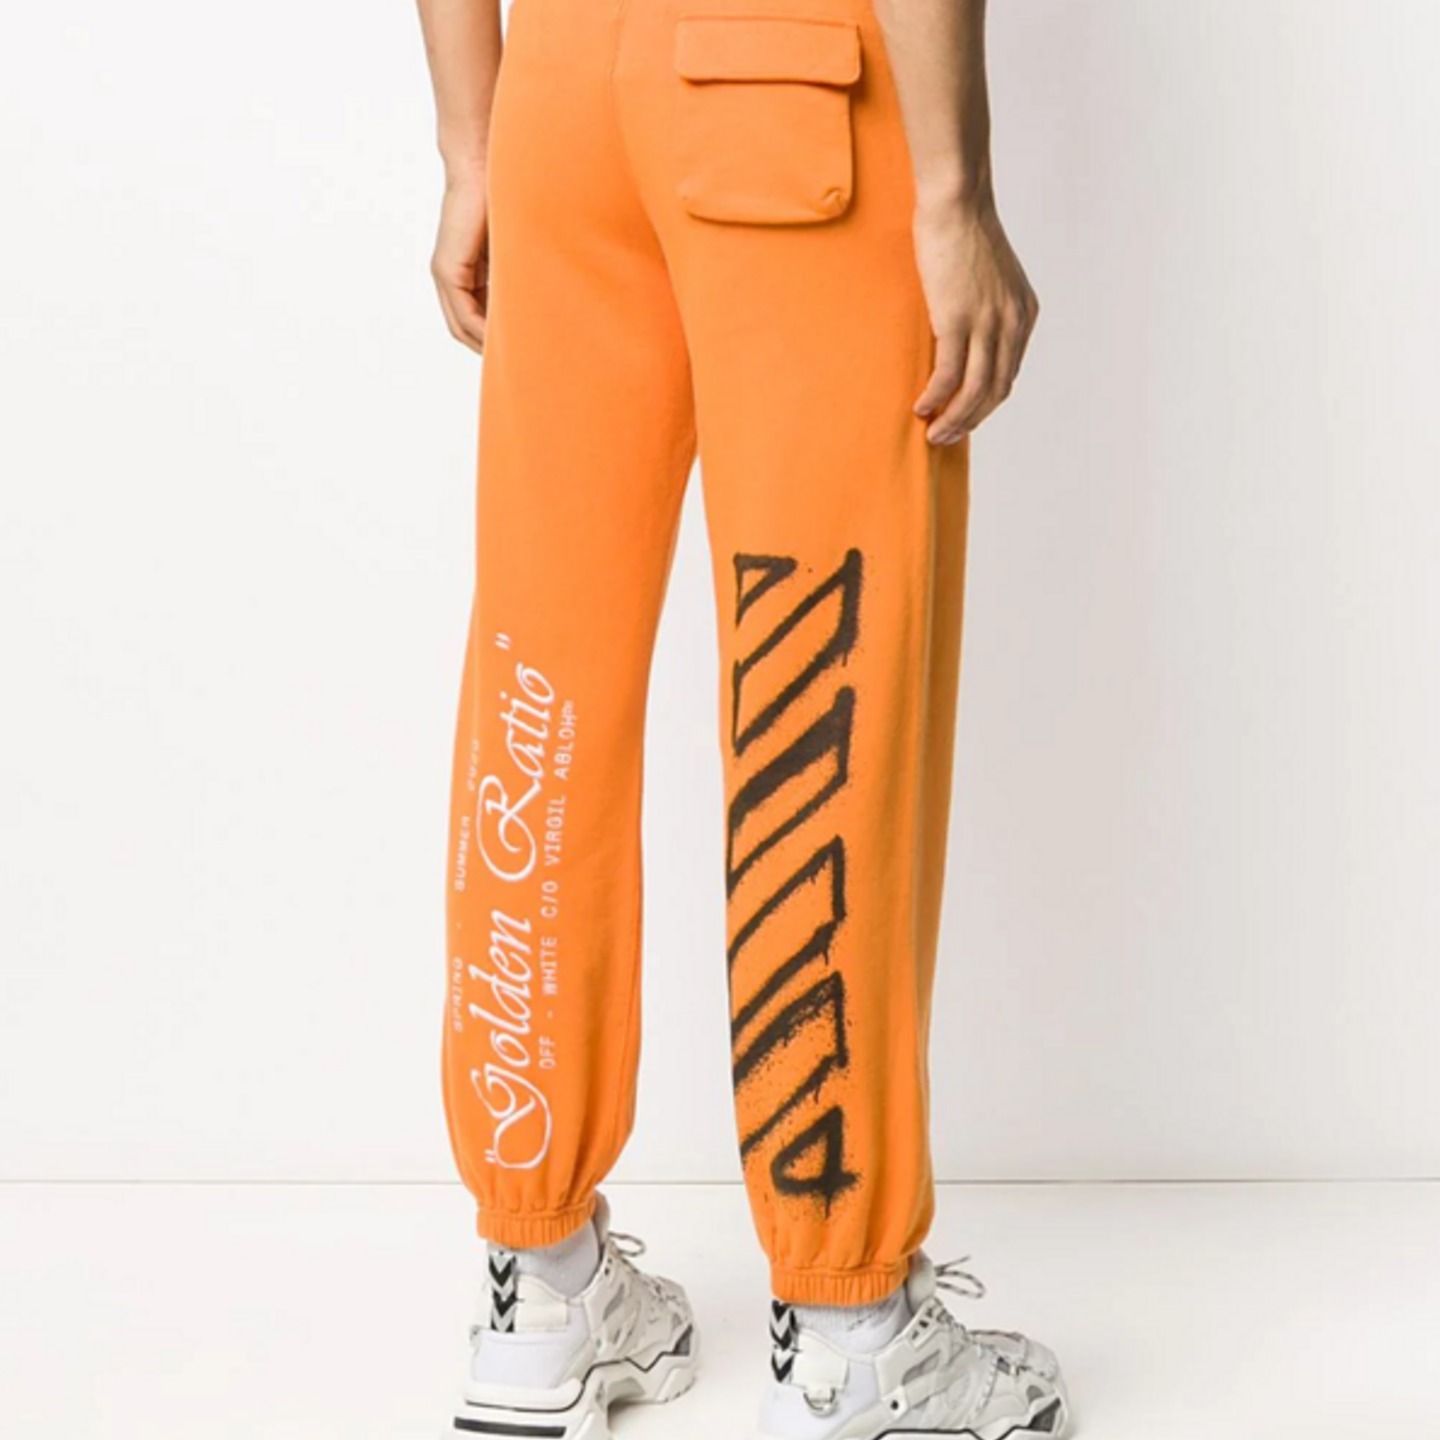 Off White Harry the Bunny Sweatpants